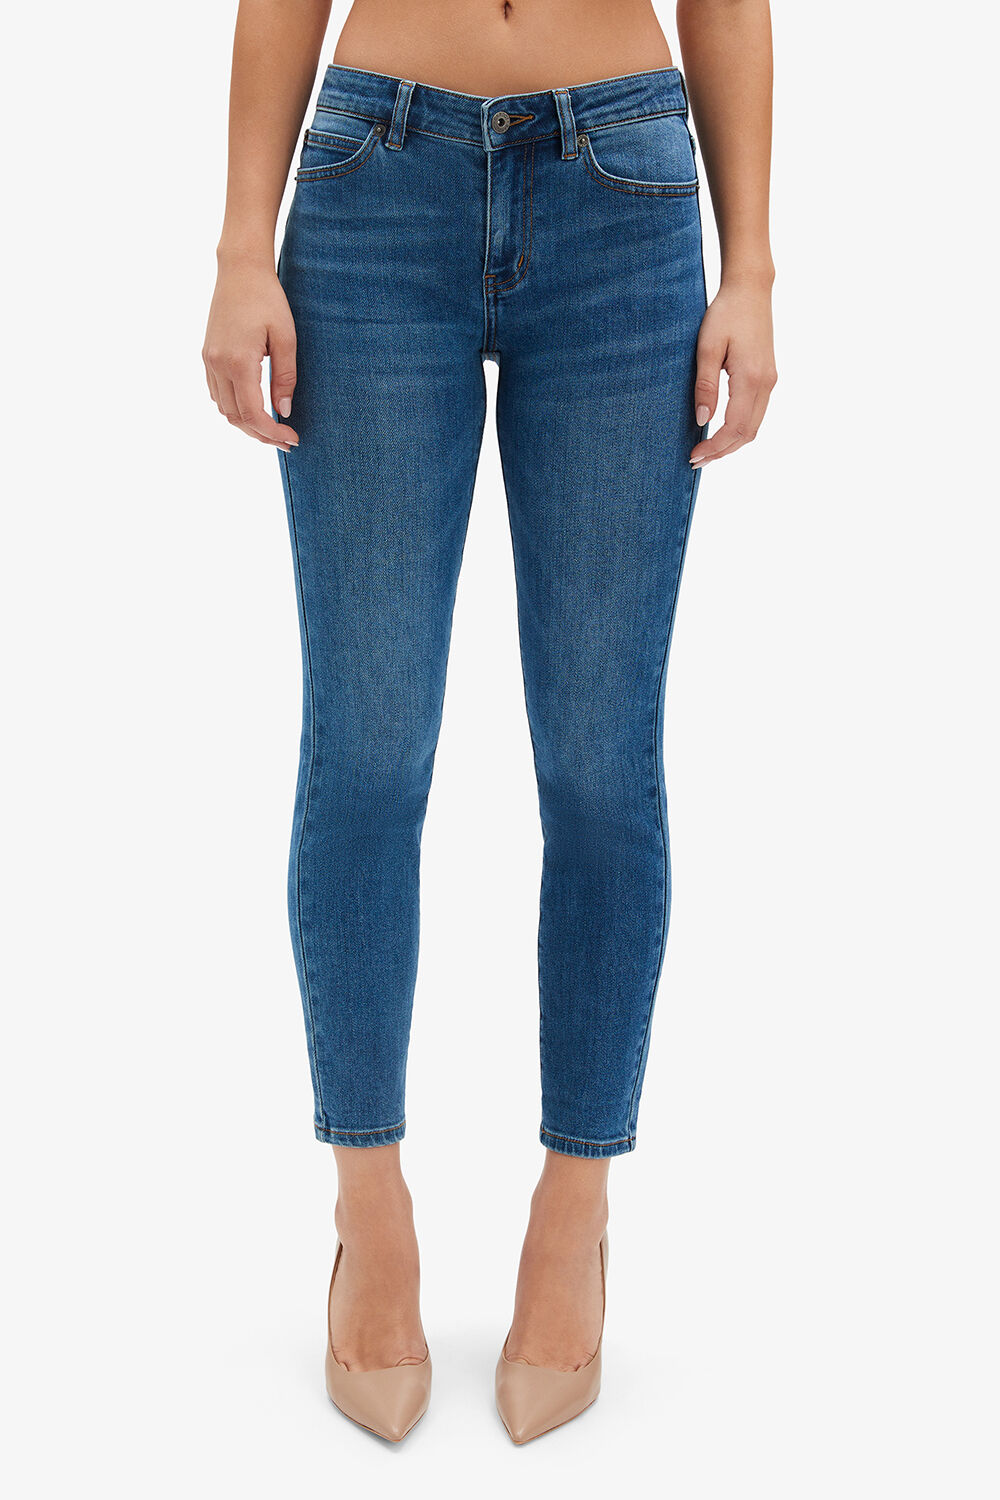 KNOX SKINNY CROPPED JEAN in colour CITADEL